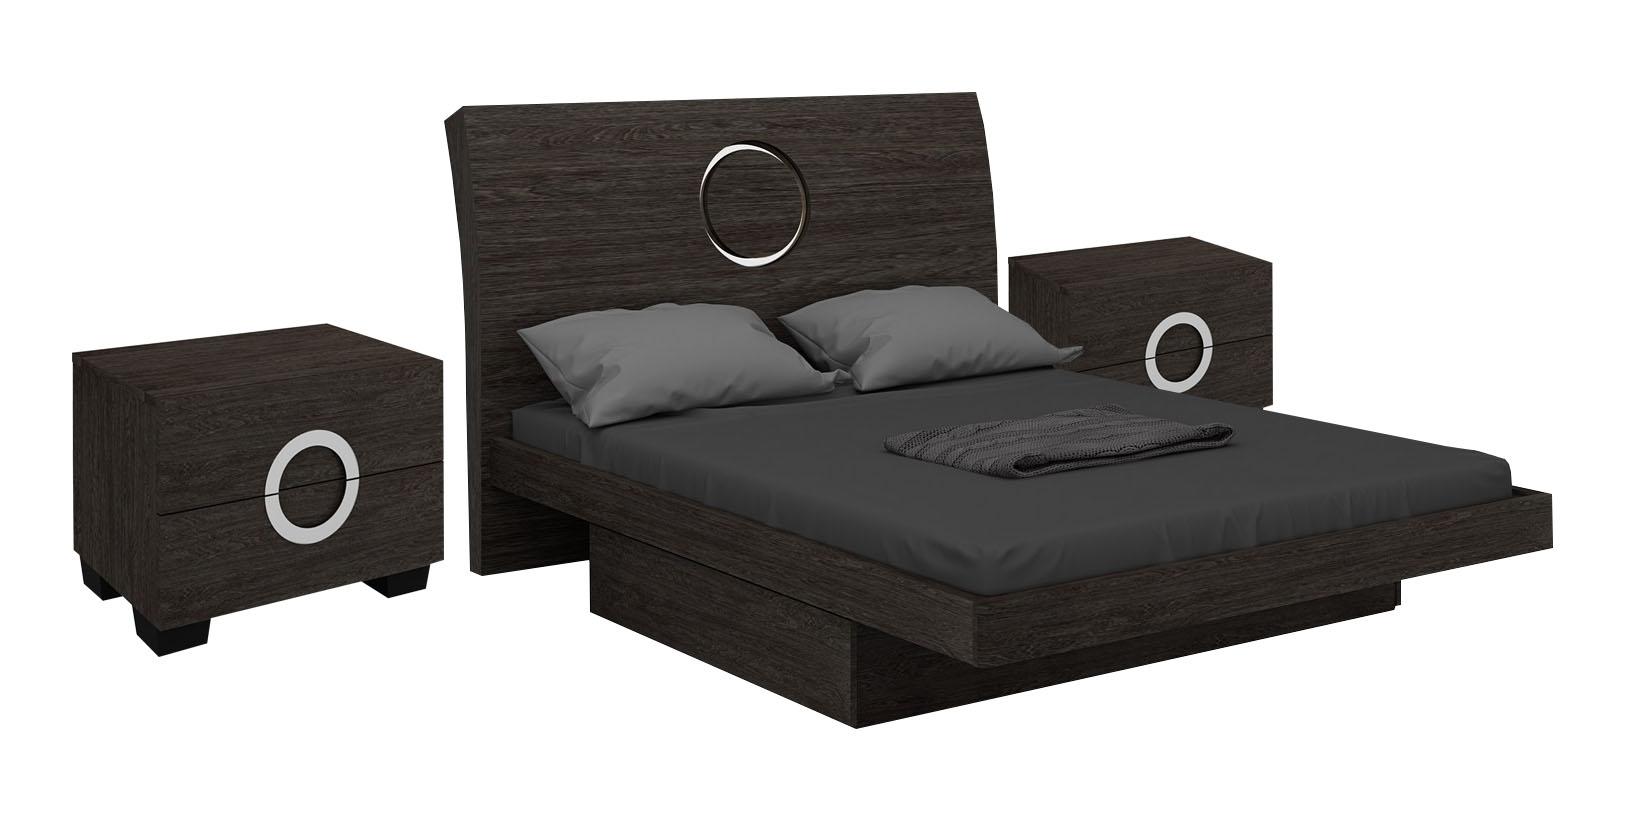 Contemporary, Modern Platform Bedroom Set Monte Carlo MONTE-BED-GRAY-CK-3-PC in Gray Lacquer